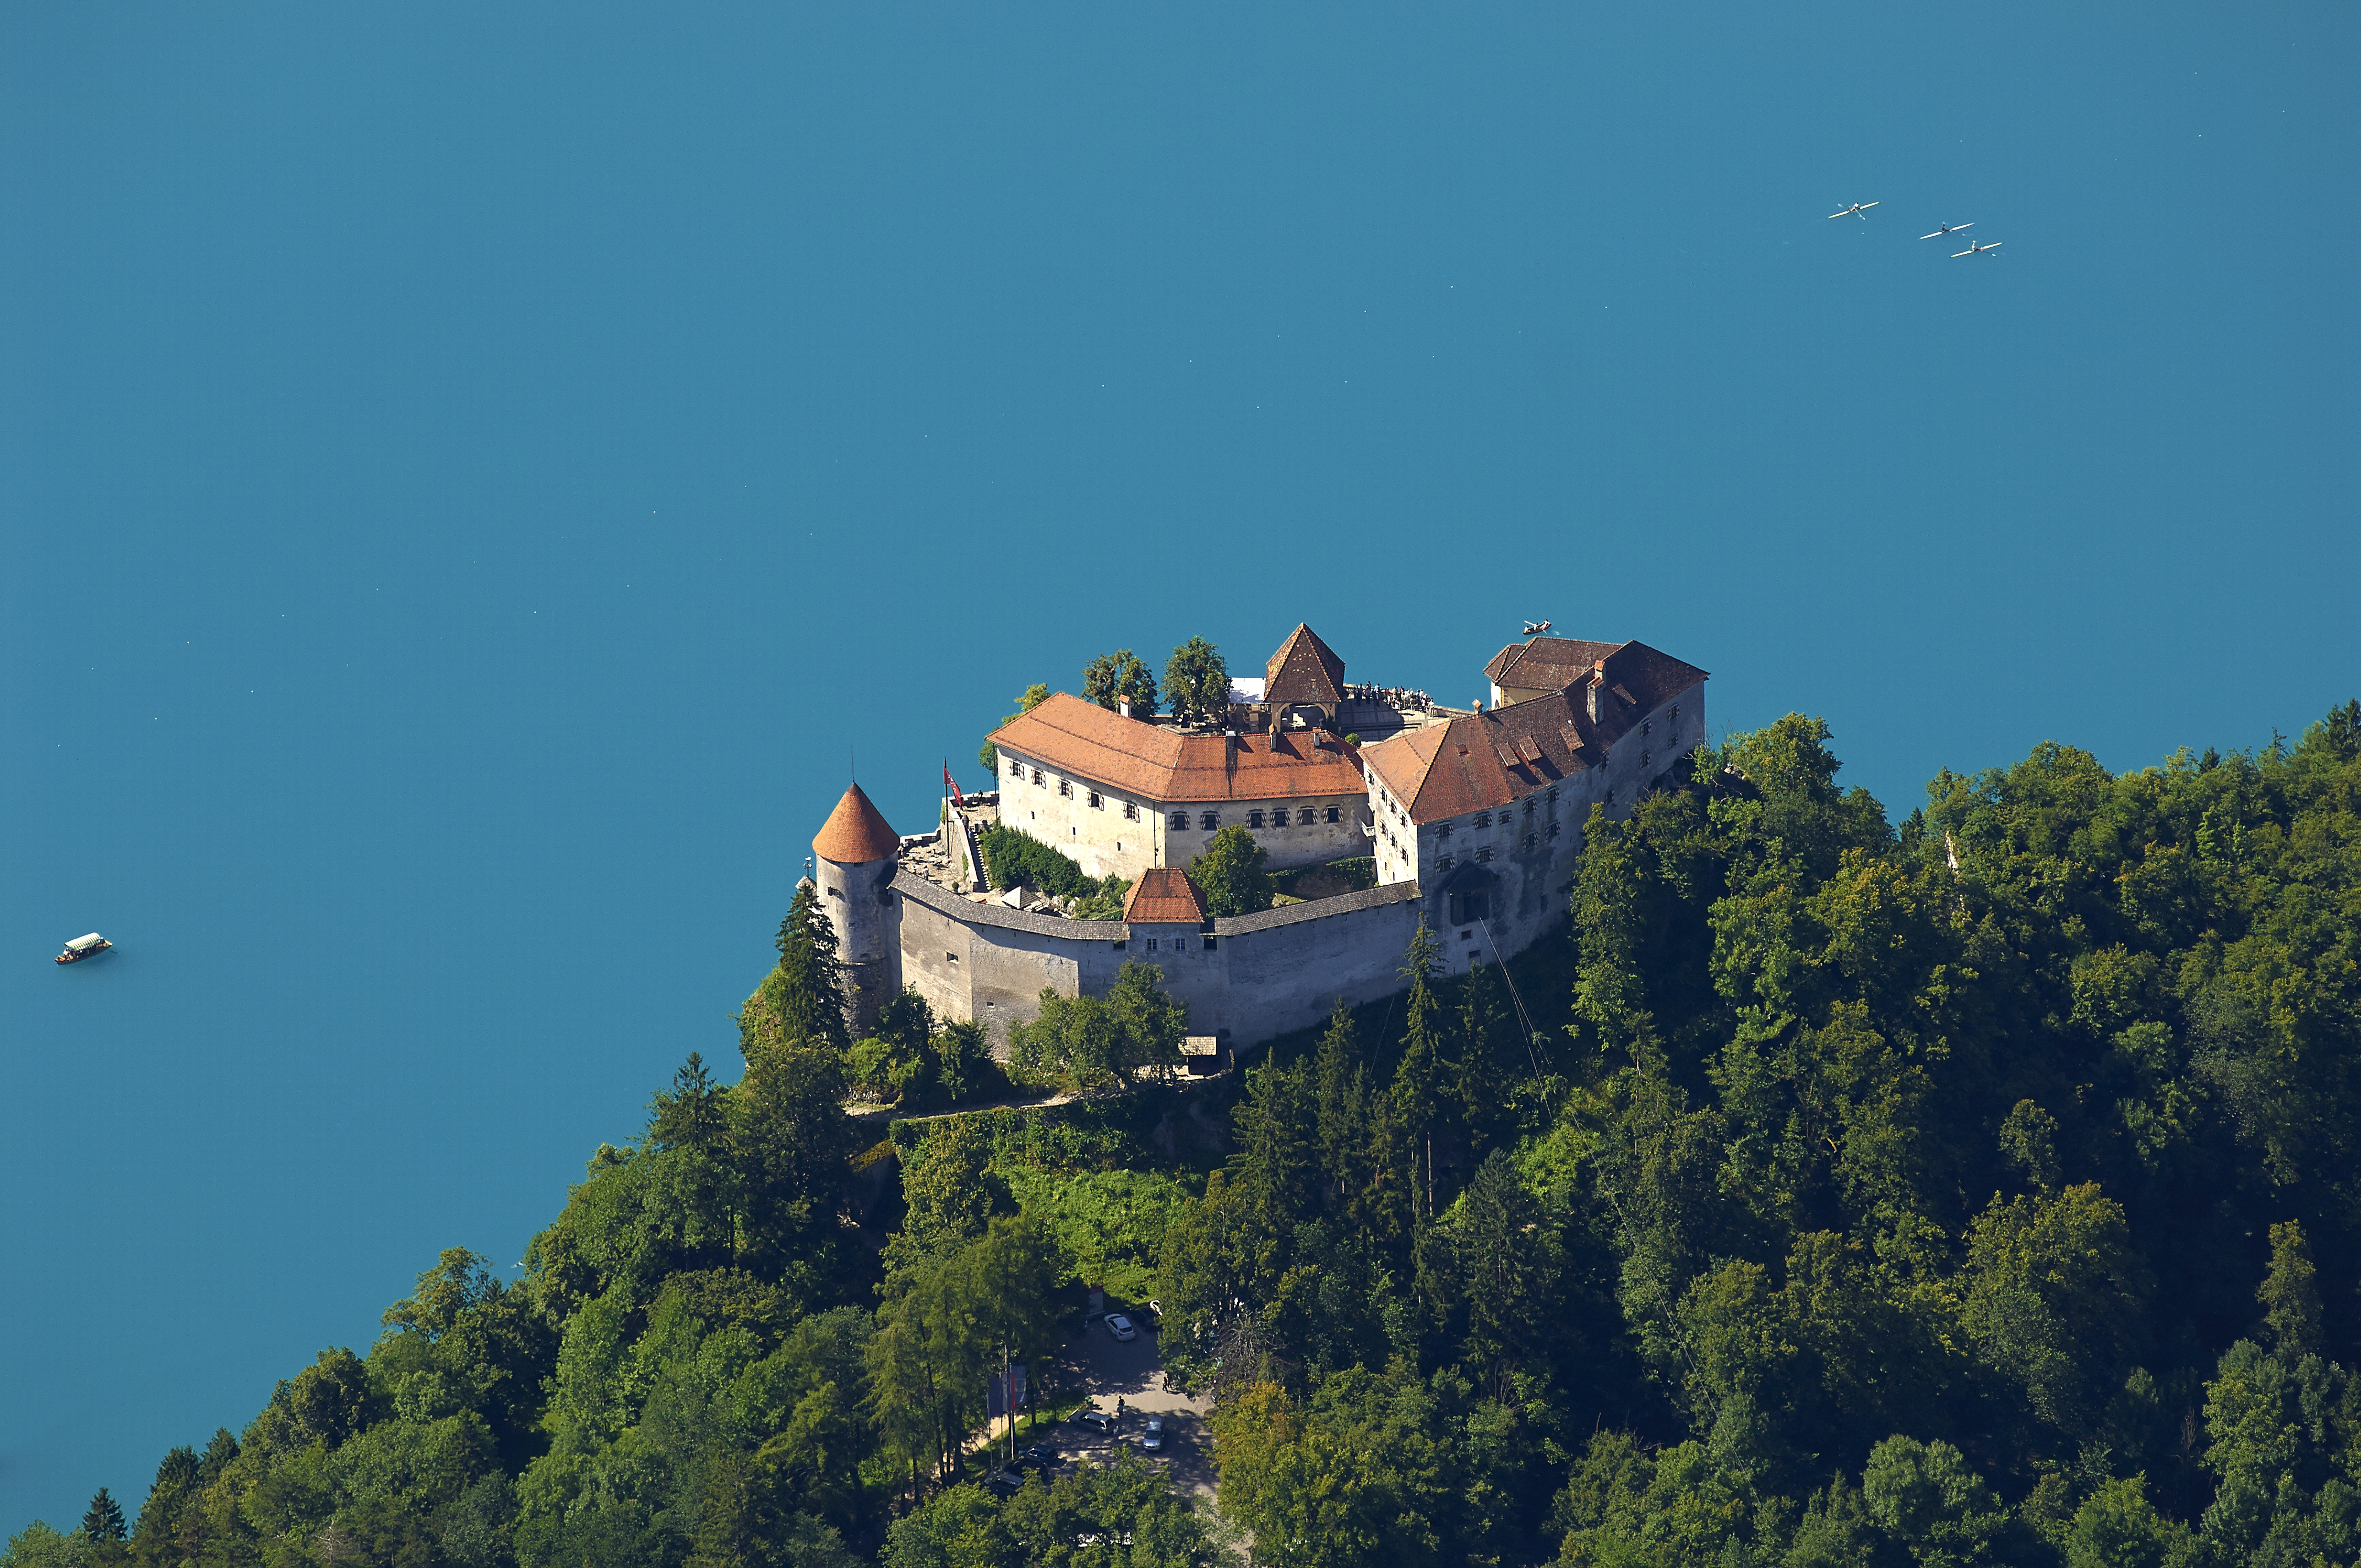 The Rikli walk to Bled Castle